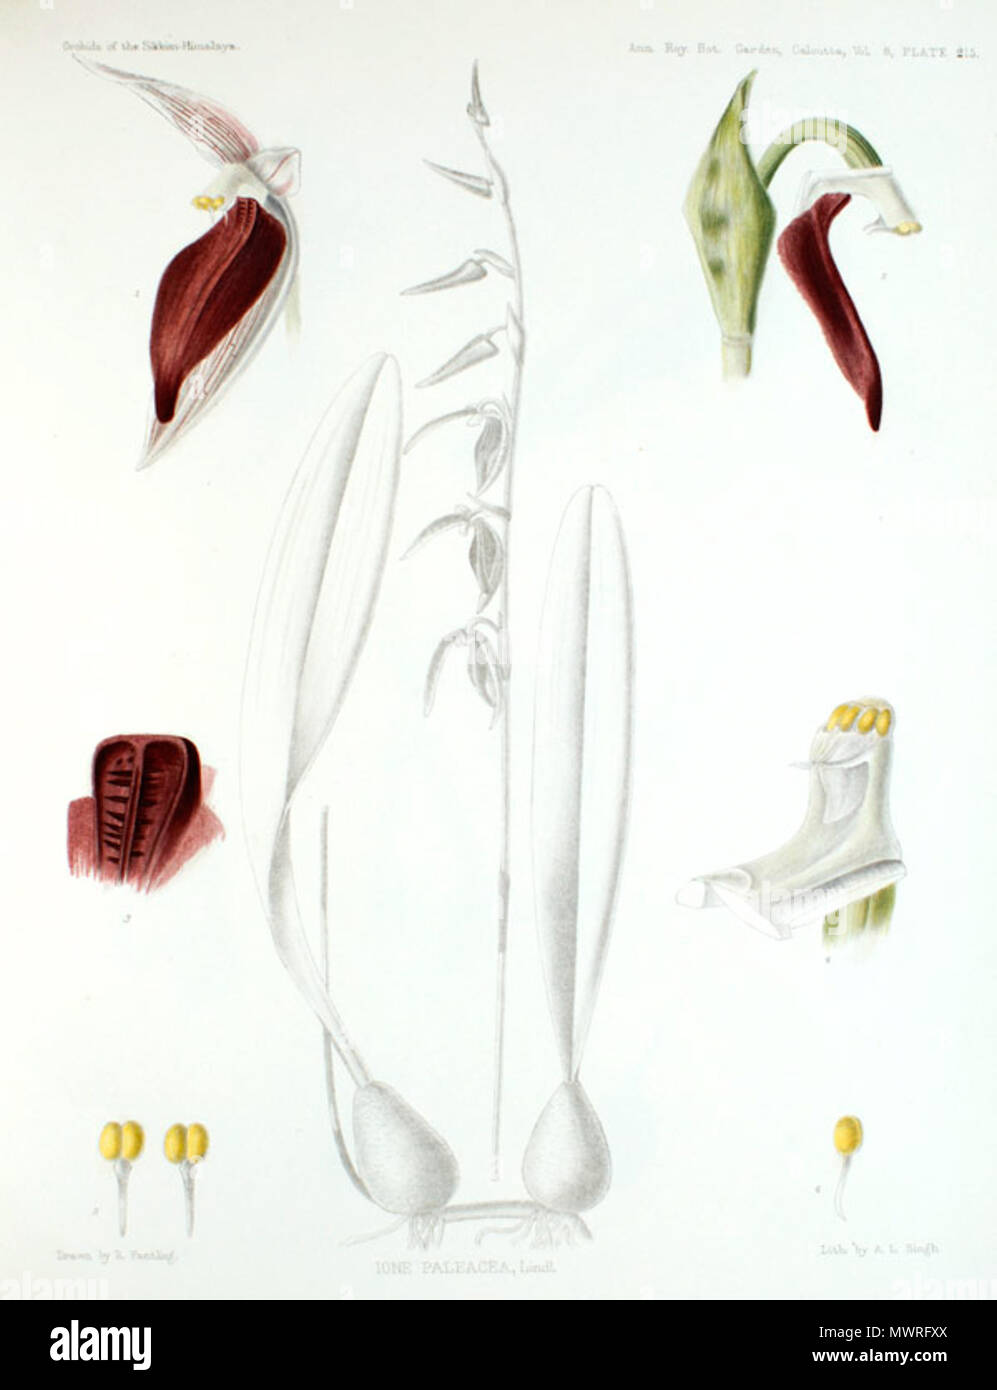 . Illustration of Sunipia cirrhata (as syn. Ione paleacea) . 1898. G. King and R. Pantling 581 Sunipia cirrhata (as Ione paleacea) - The Orchids of the Sikkim-Himalaya pl 215 (1898) Stock Photo